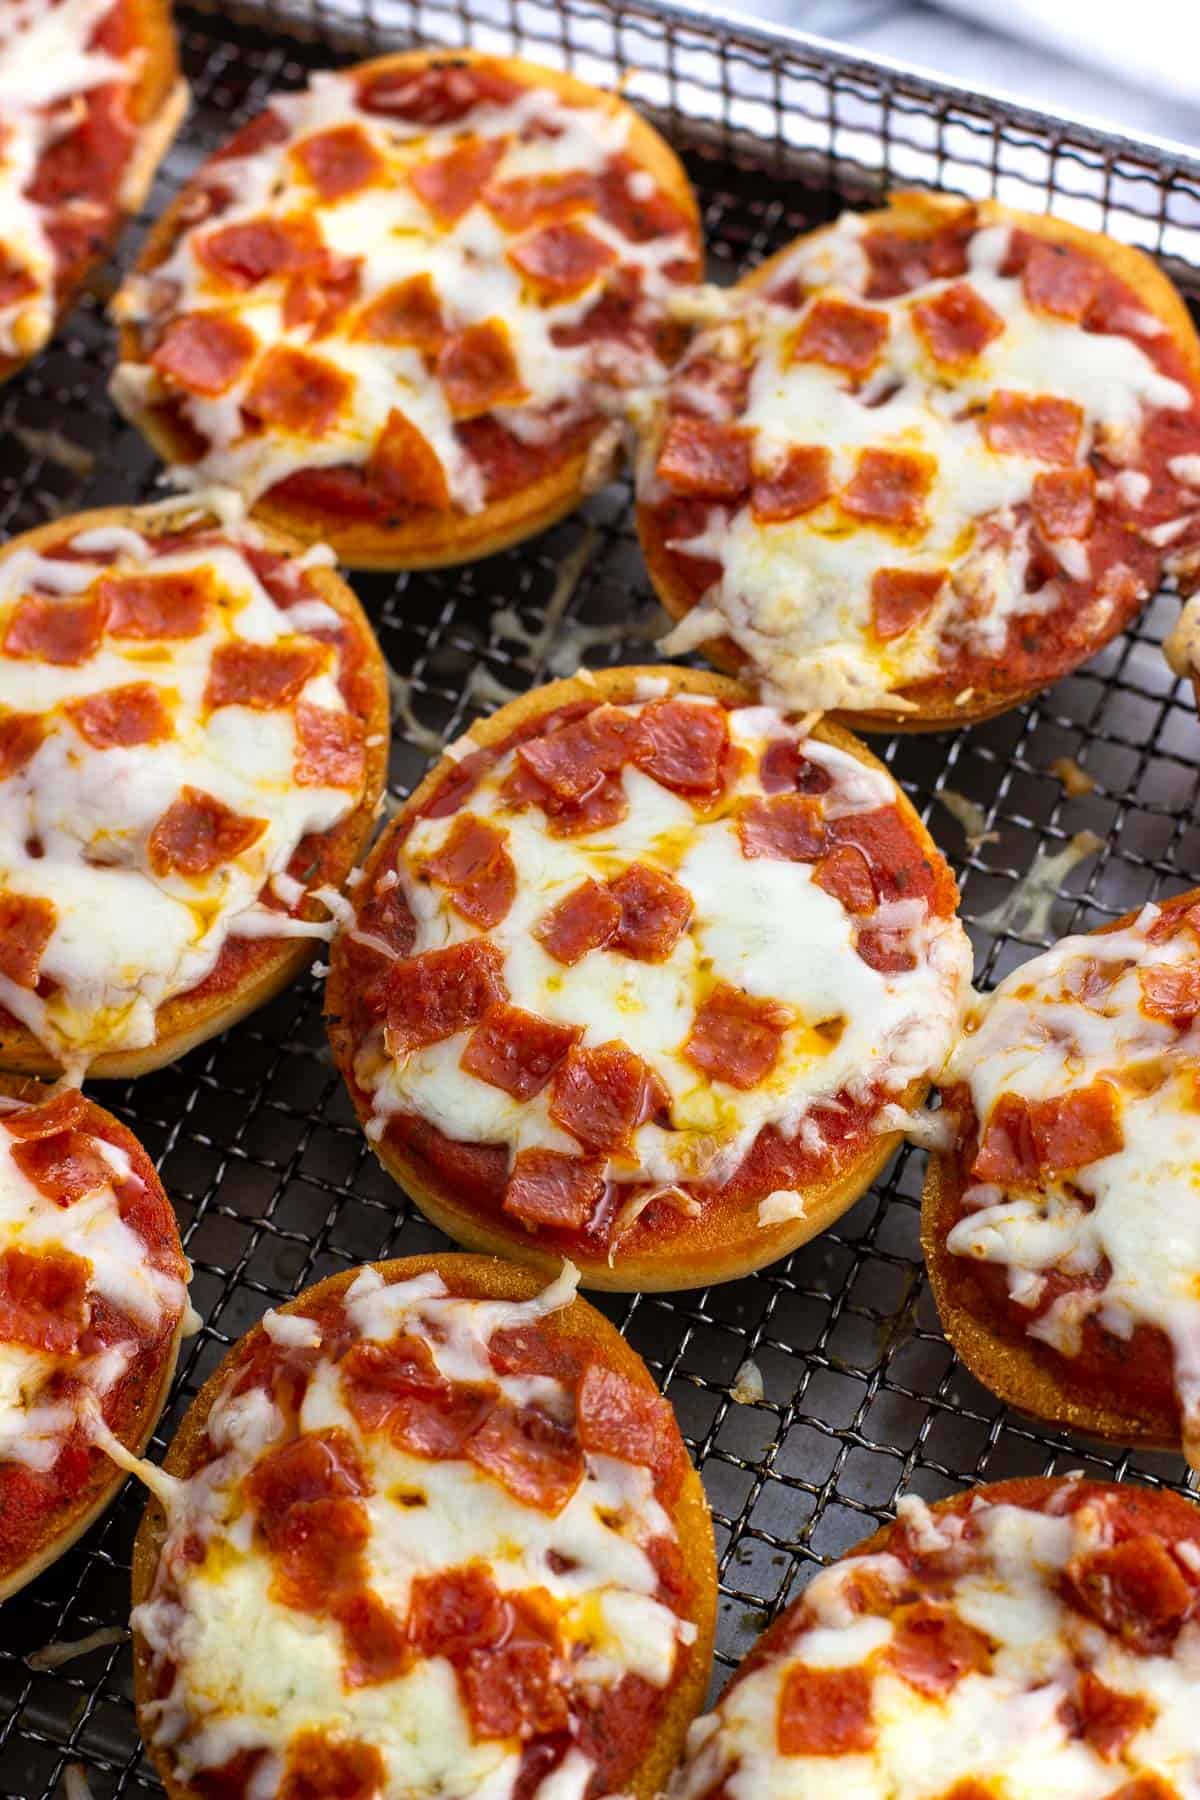 Cooked pizza bagels on a wire air fryer basket.